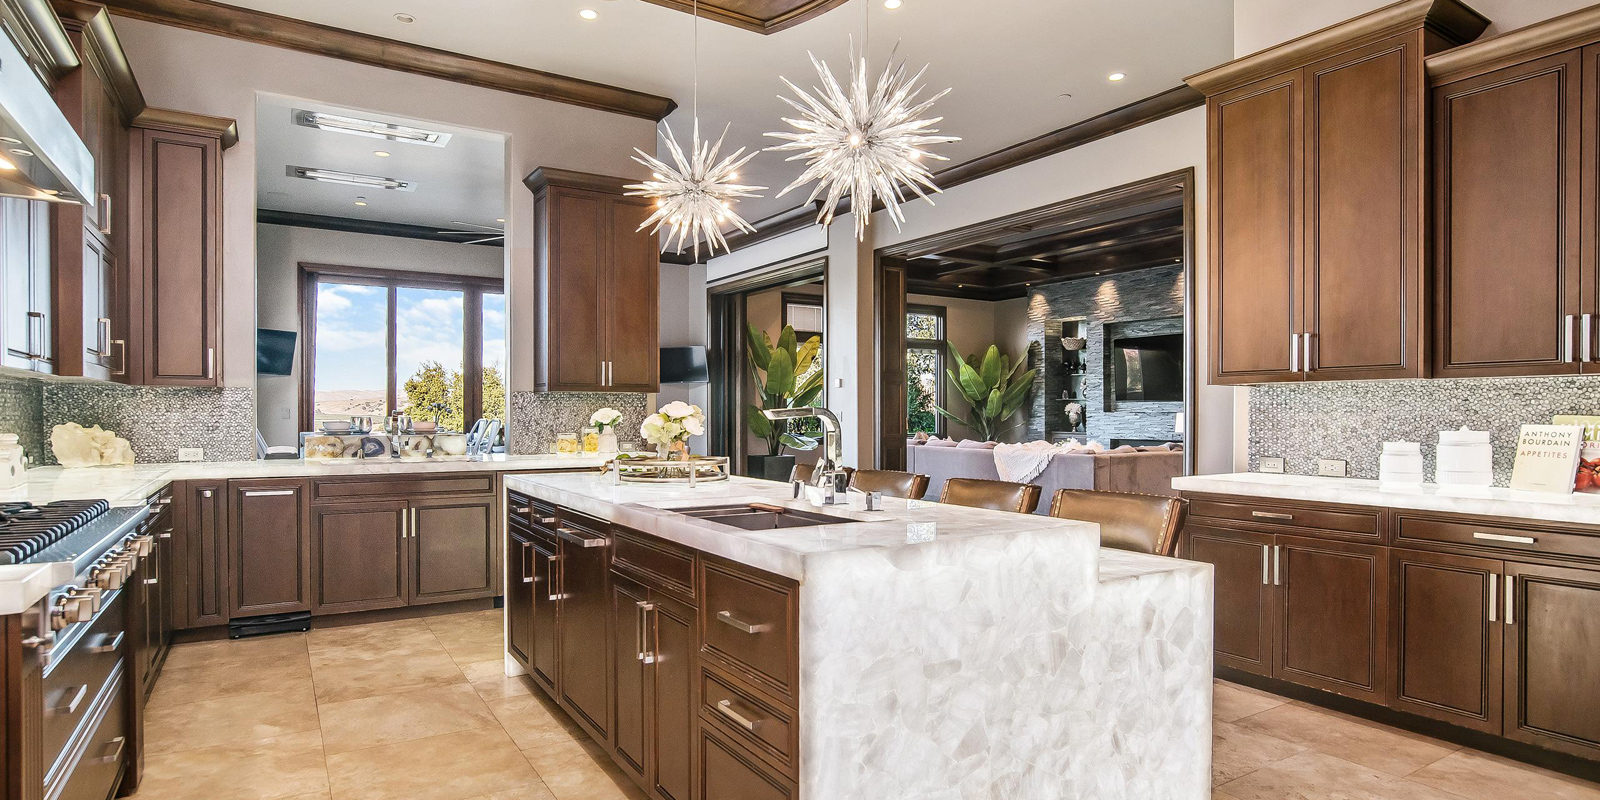 Kitchen of a luxury homes for sale in Pleasanton, CA